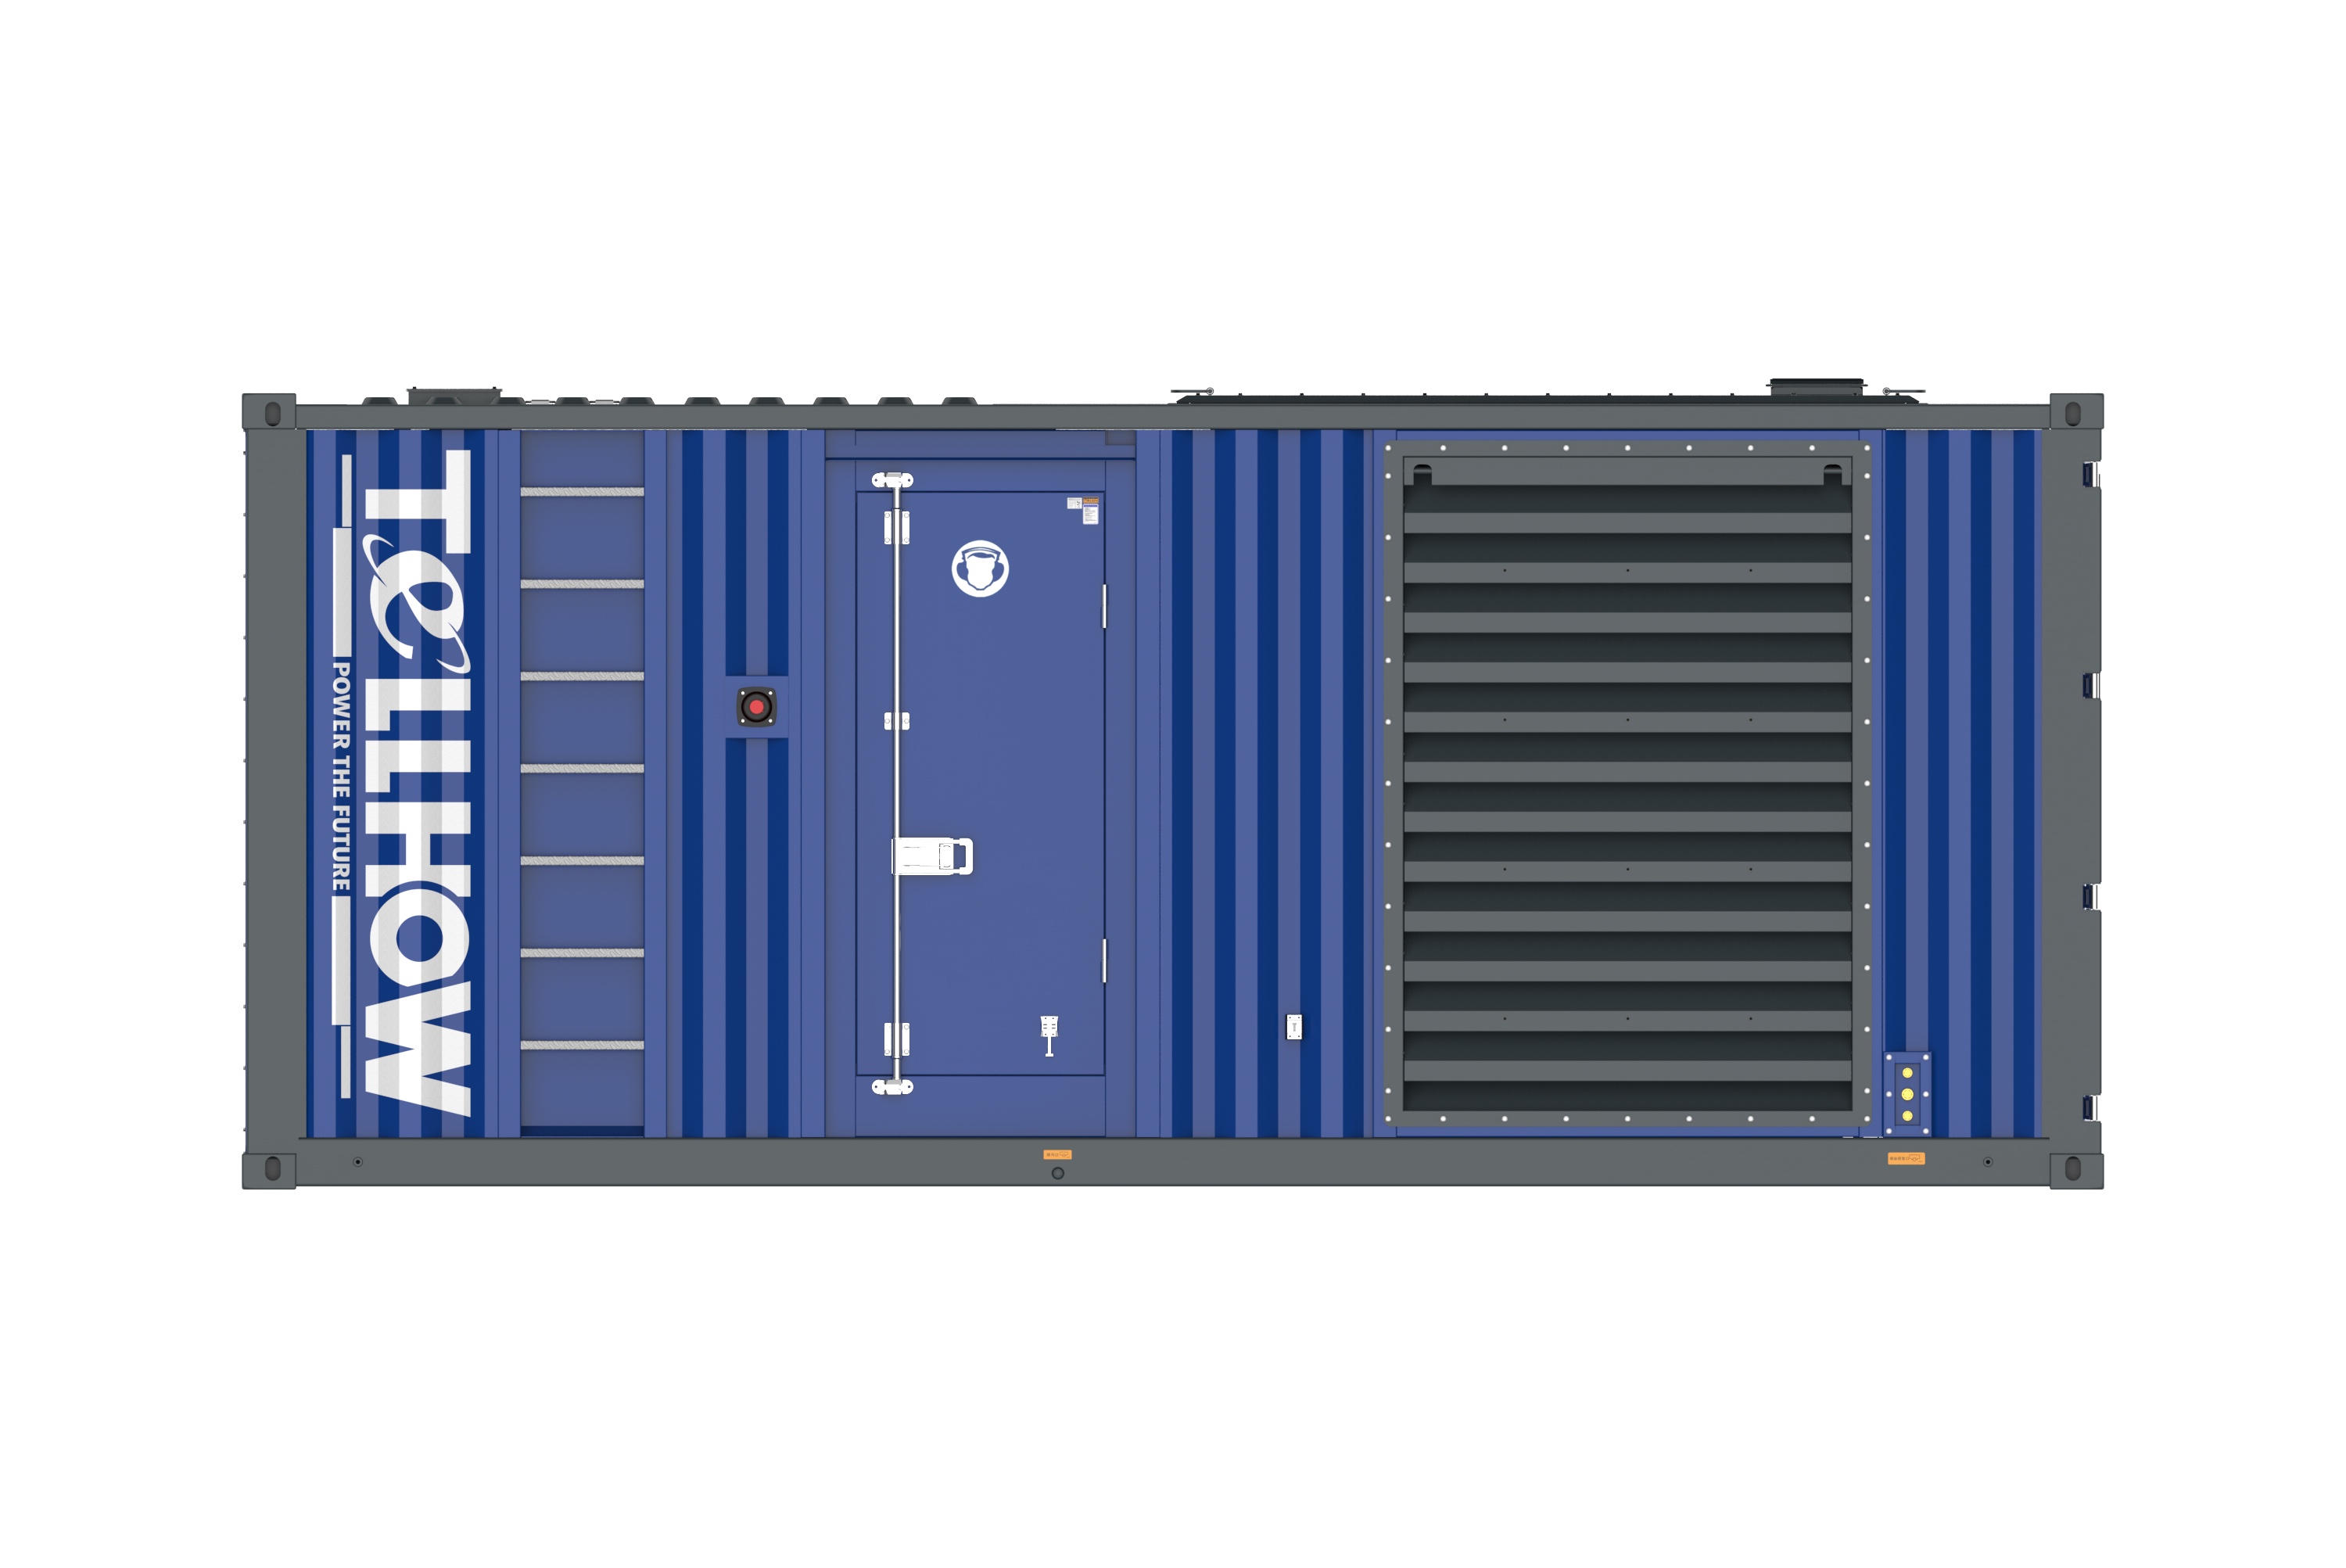 Perkins series containerized genset type C